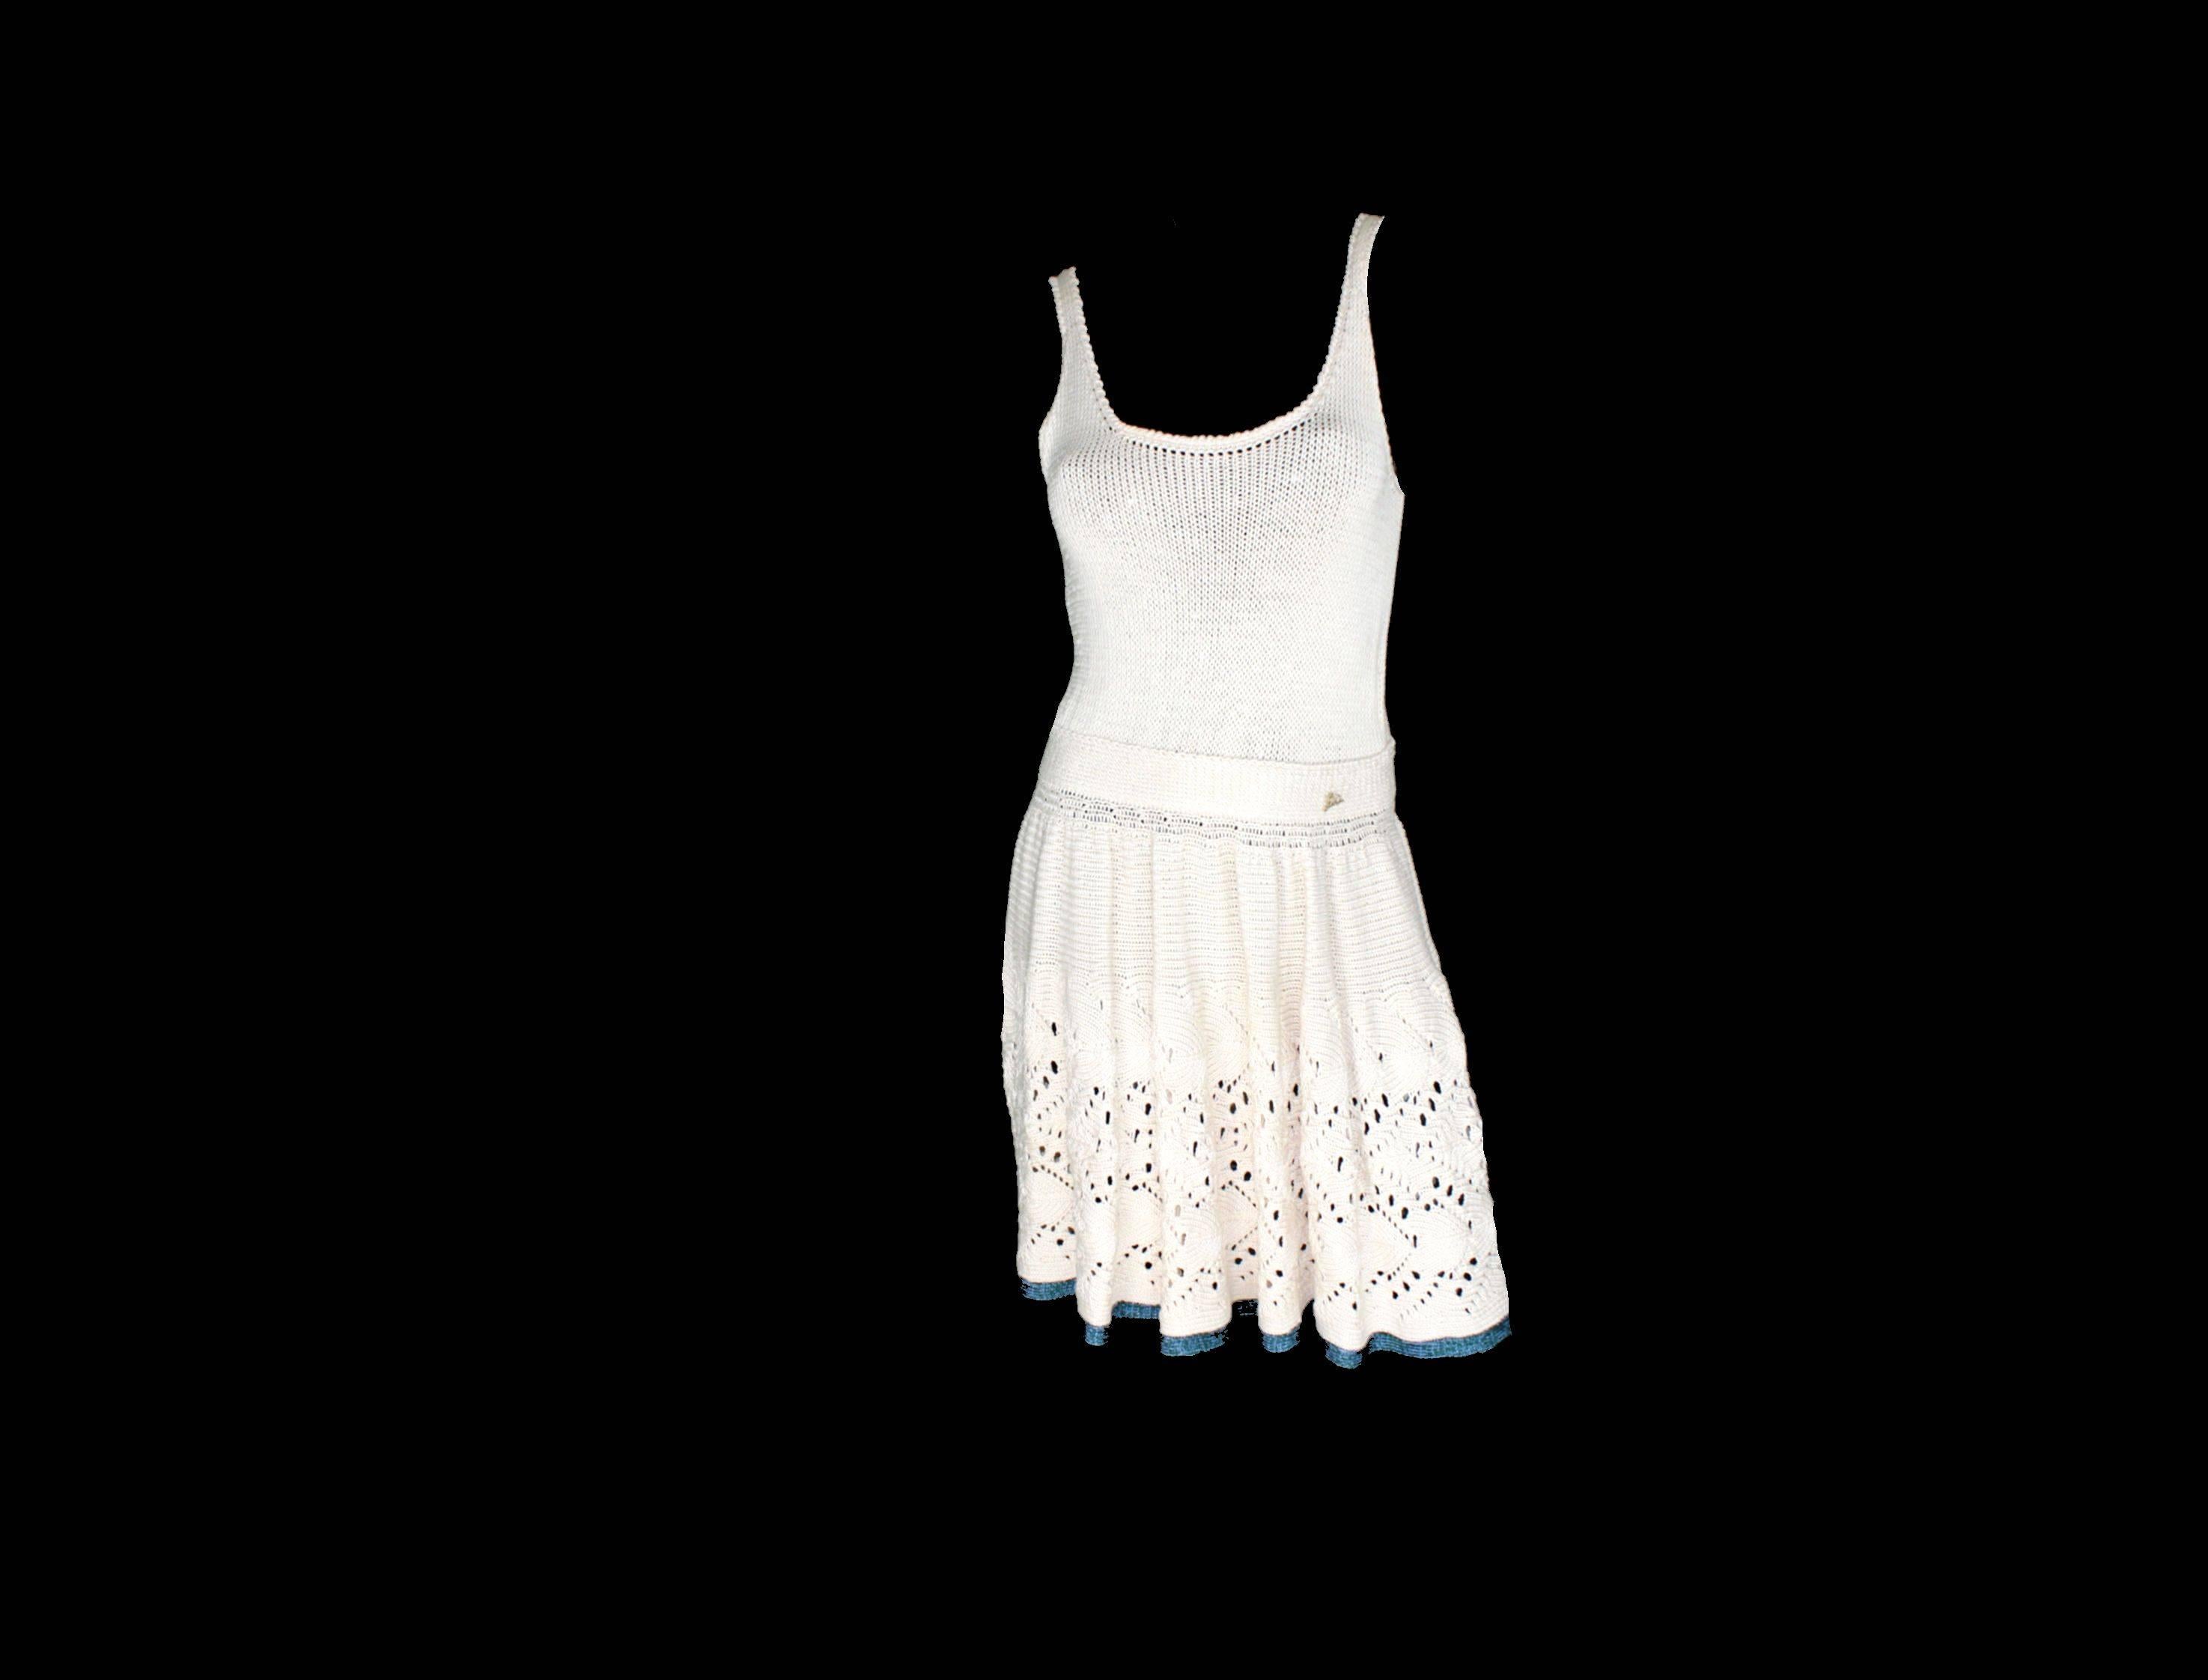 A stunning crochet knit dress by CHANEL
A timeless classic 
Featured in many editorials, seen on the runway and the AD campaign
Off-white with seafoam-colored trimming on seam
Chanel logo plate on waist
Finest crochet knit
Dry Clean Only
Size